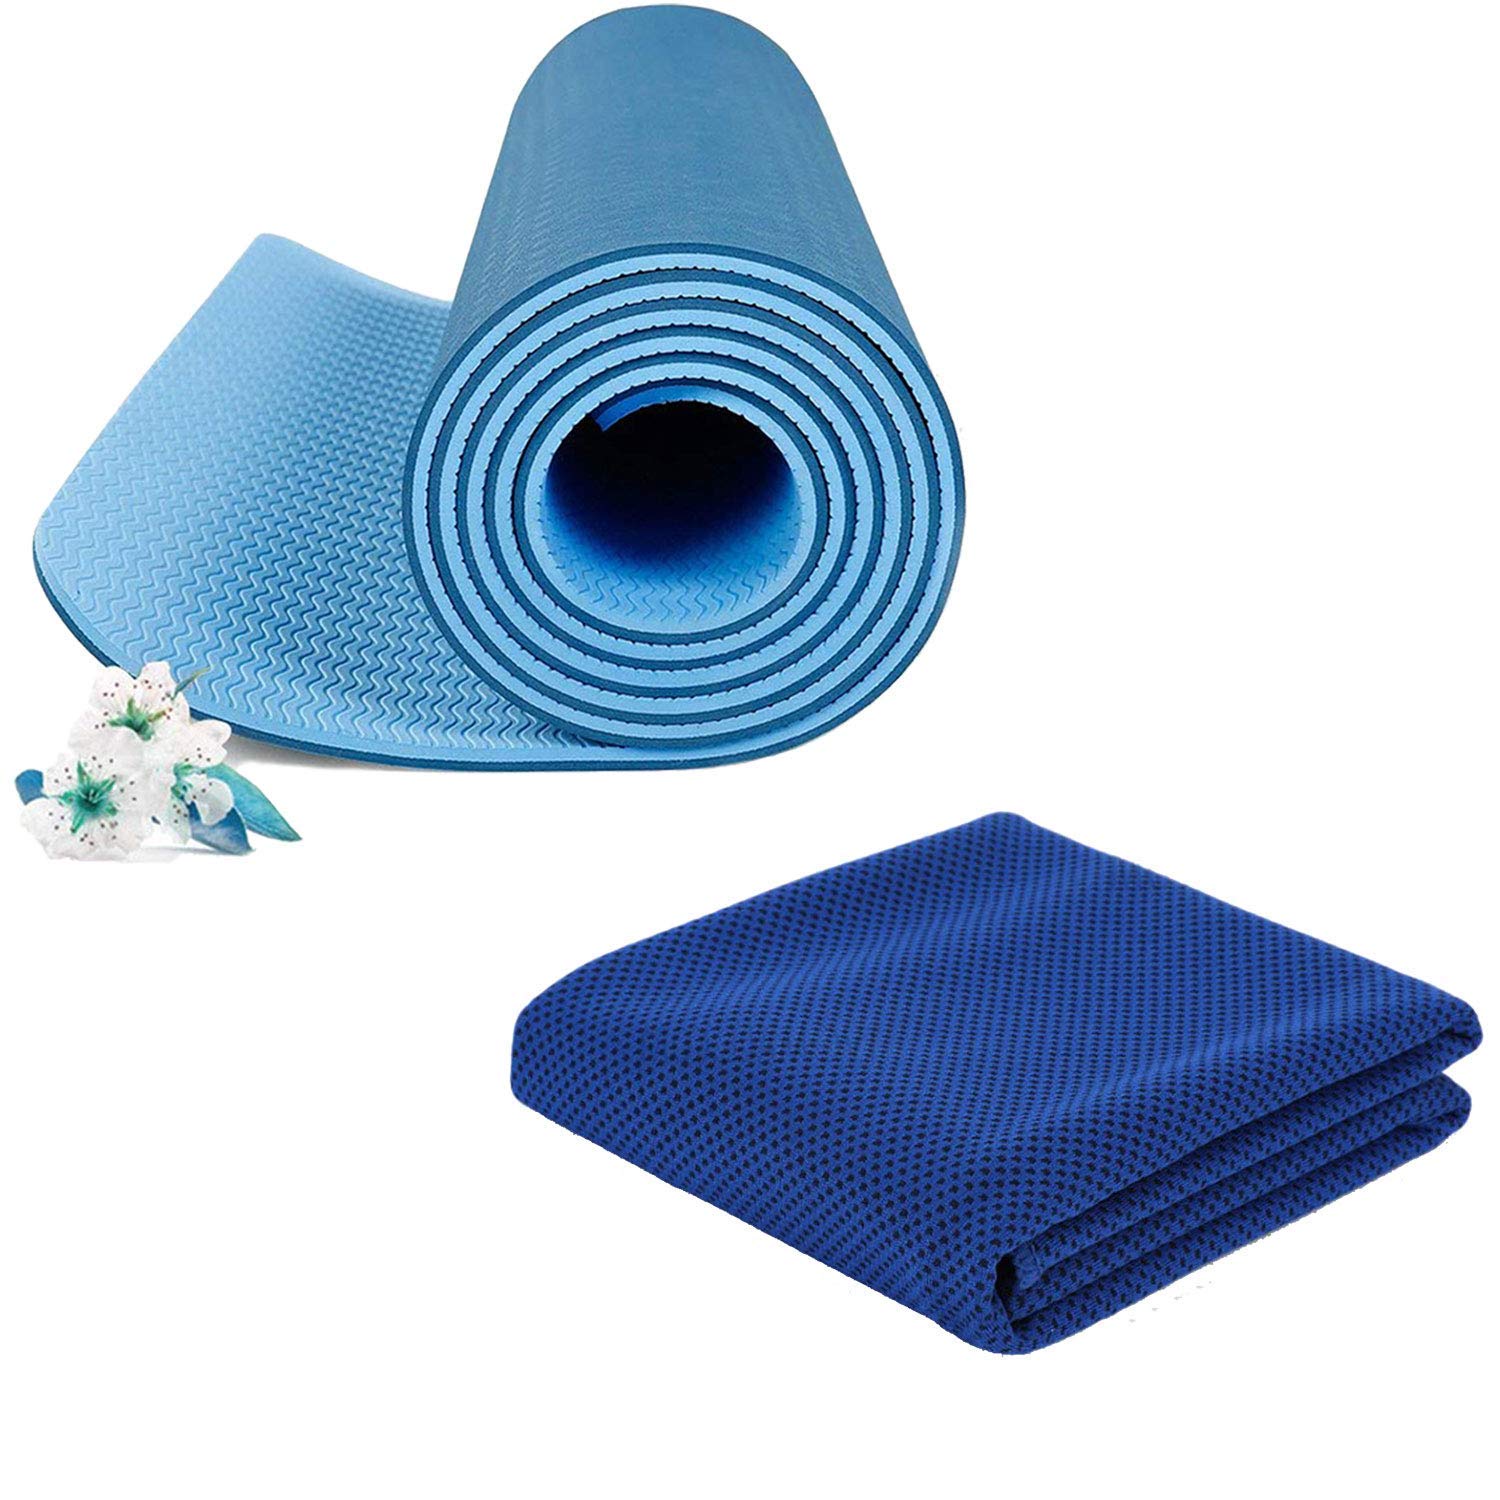 Strauss TPE Eco Friendly Dual Layer Yoga Mat, 6mm (Blue) and Cooling